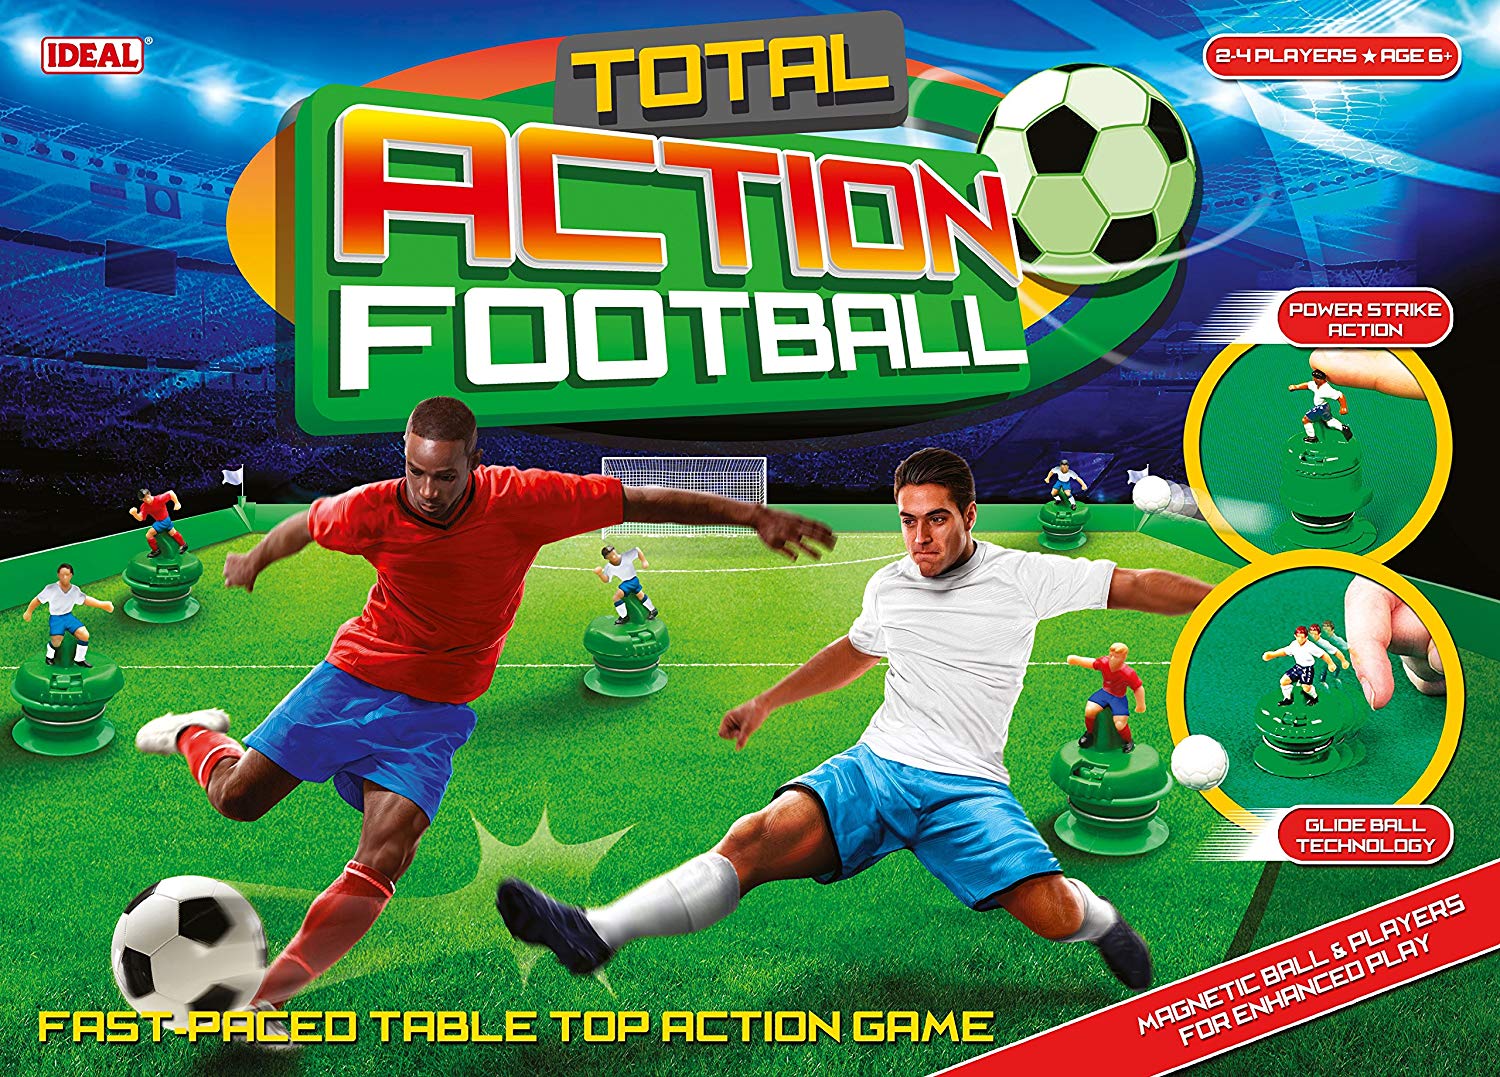 Five A Side Total Action Football Game from Ideal – TopToy